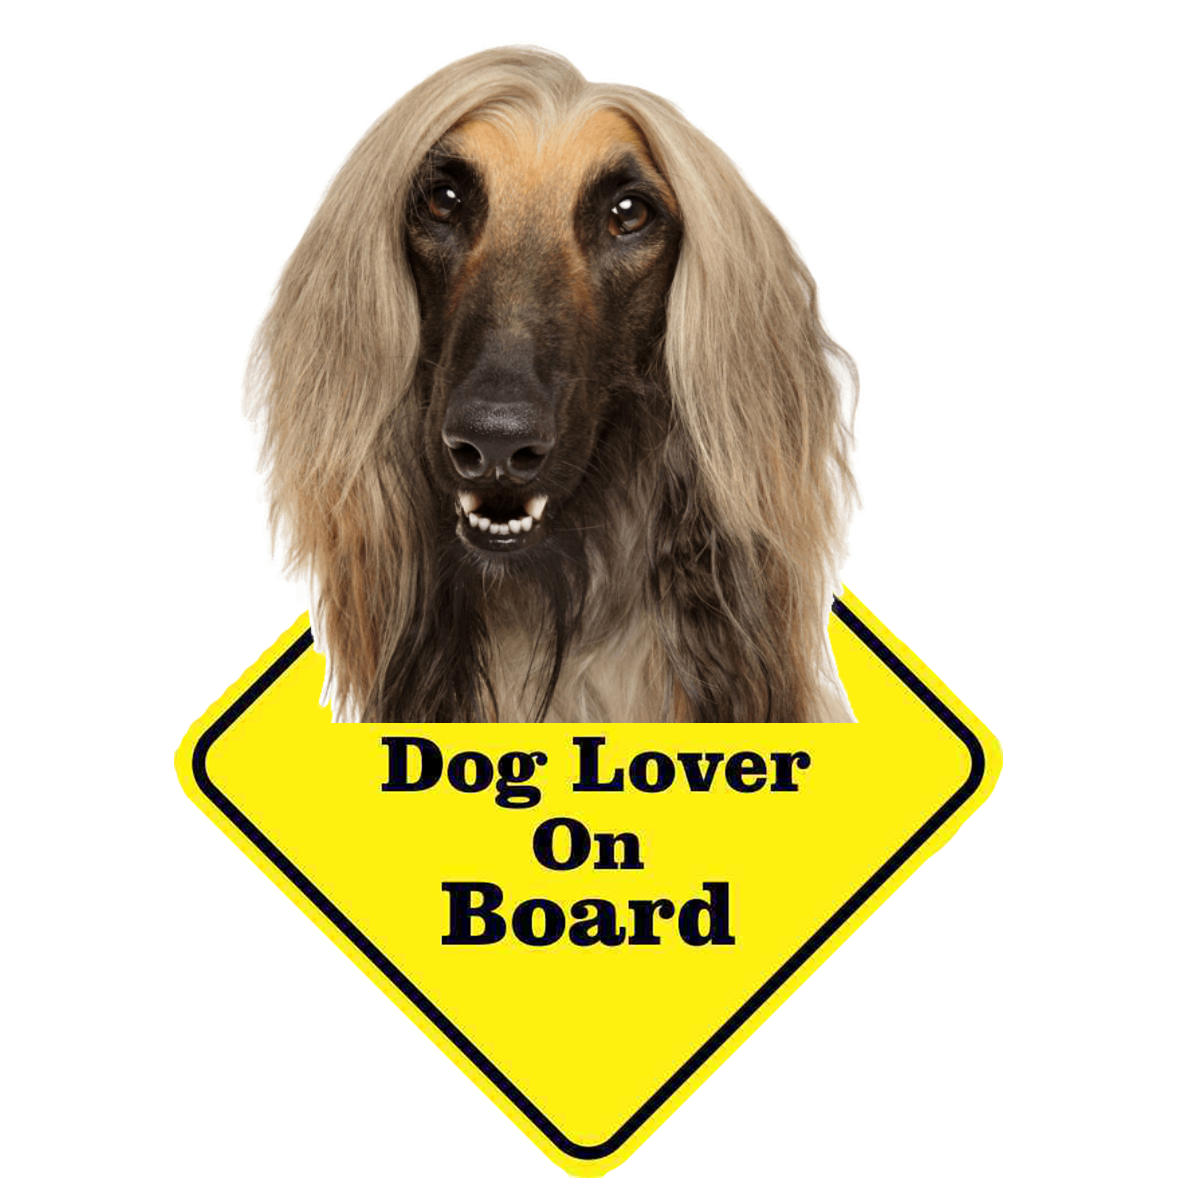 Personalised DOG LOVER ON BOARD Safety Sticker Car Vinyl Stickers Decals Accessories